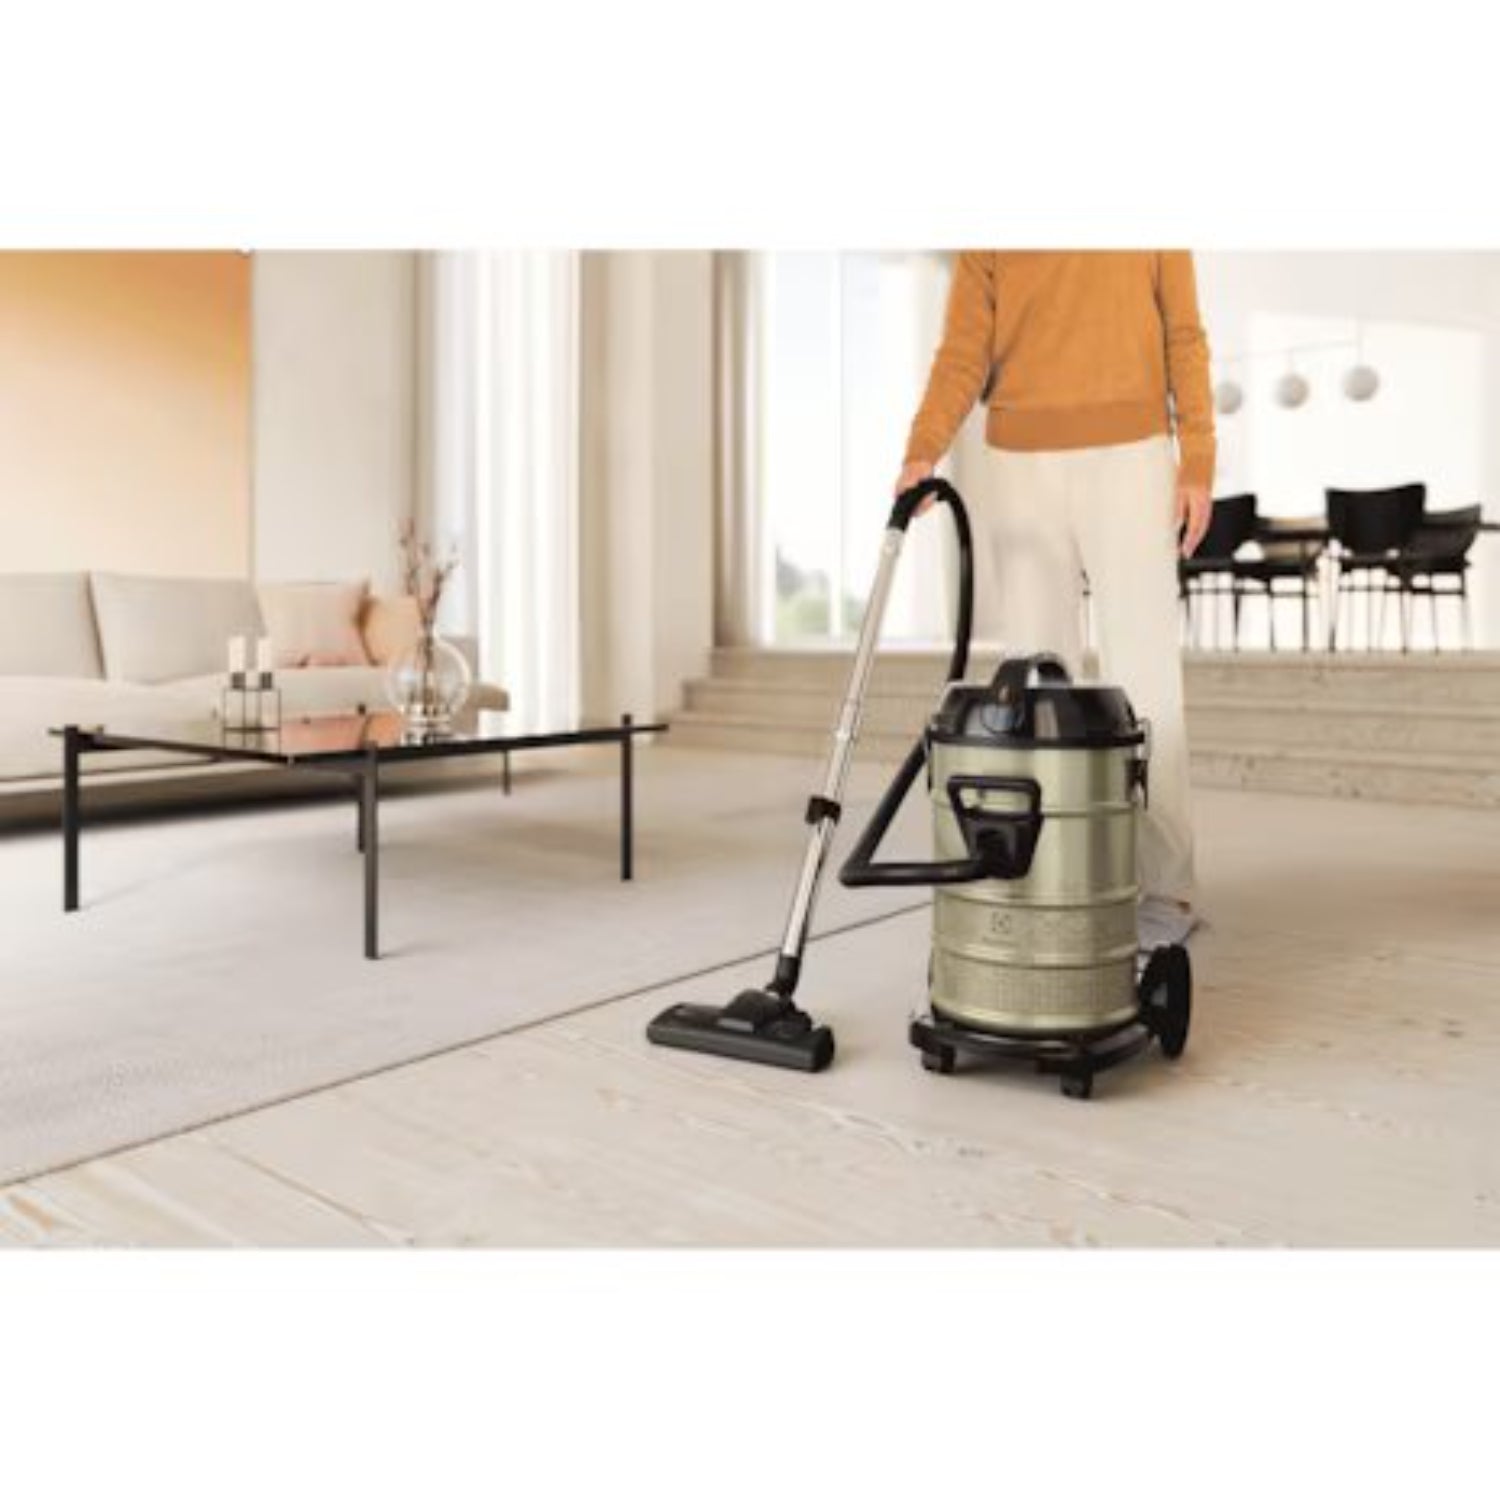 Electrolux Vacuum Cleaner with 23L Dust Bin Capacity